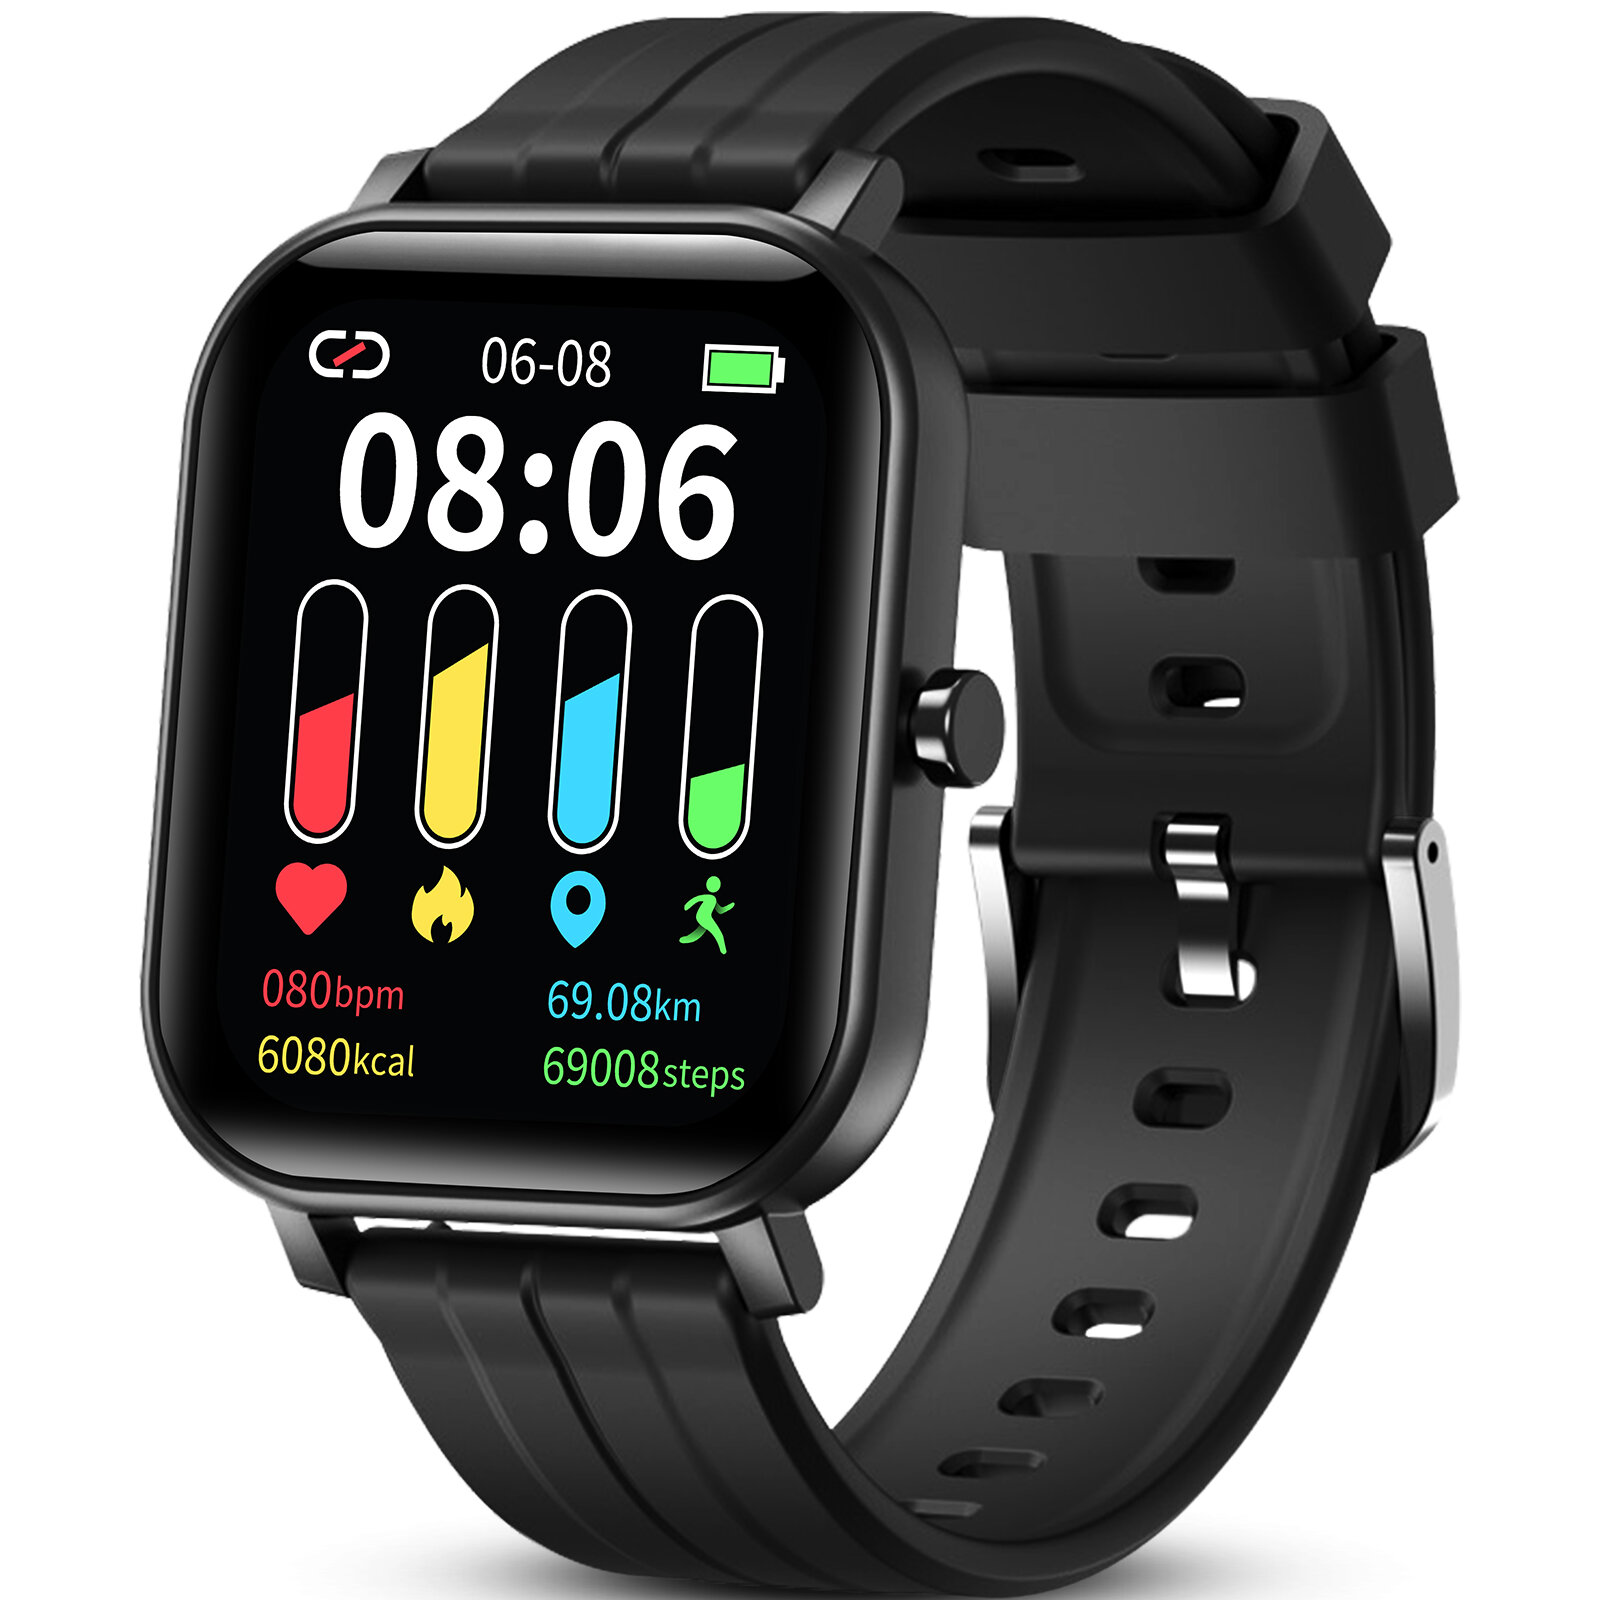 GOKOO S10 1.69 inch IPS Full Touch Screen Heart Rate Blood Pressure SpO2 Monitor Body Temperature Measurement 24 Sports Modes IP67 Waterproof Smart Watch